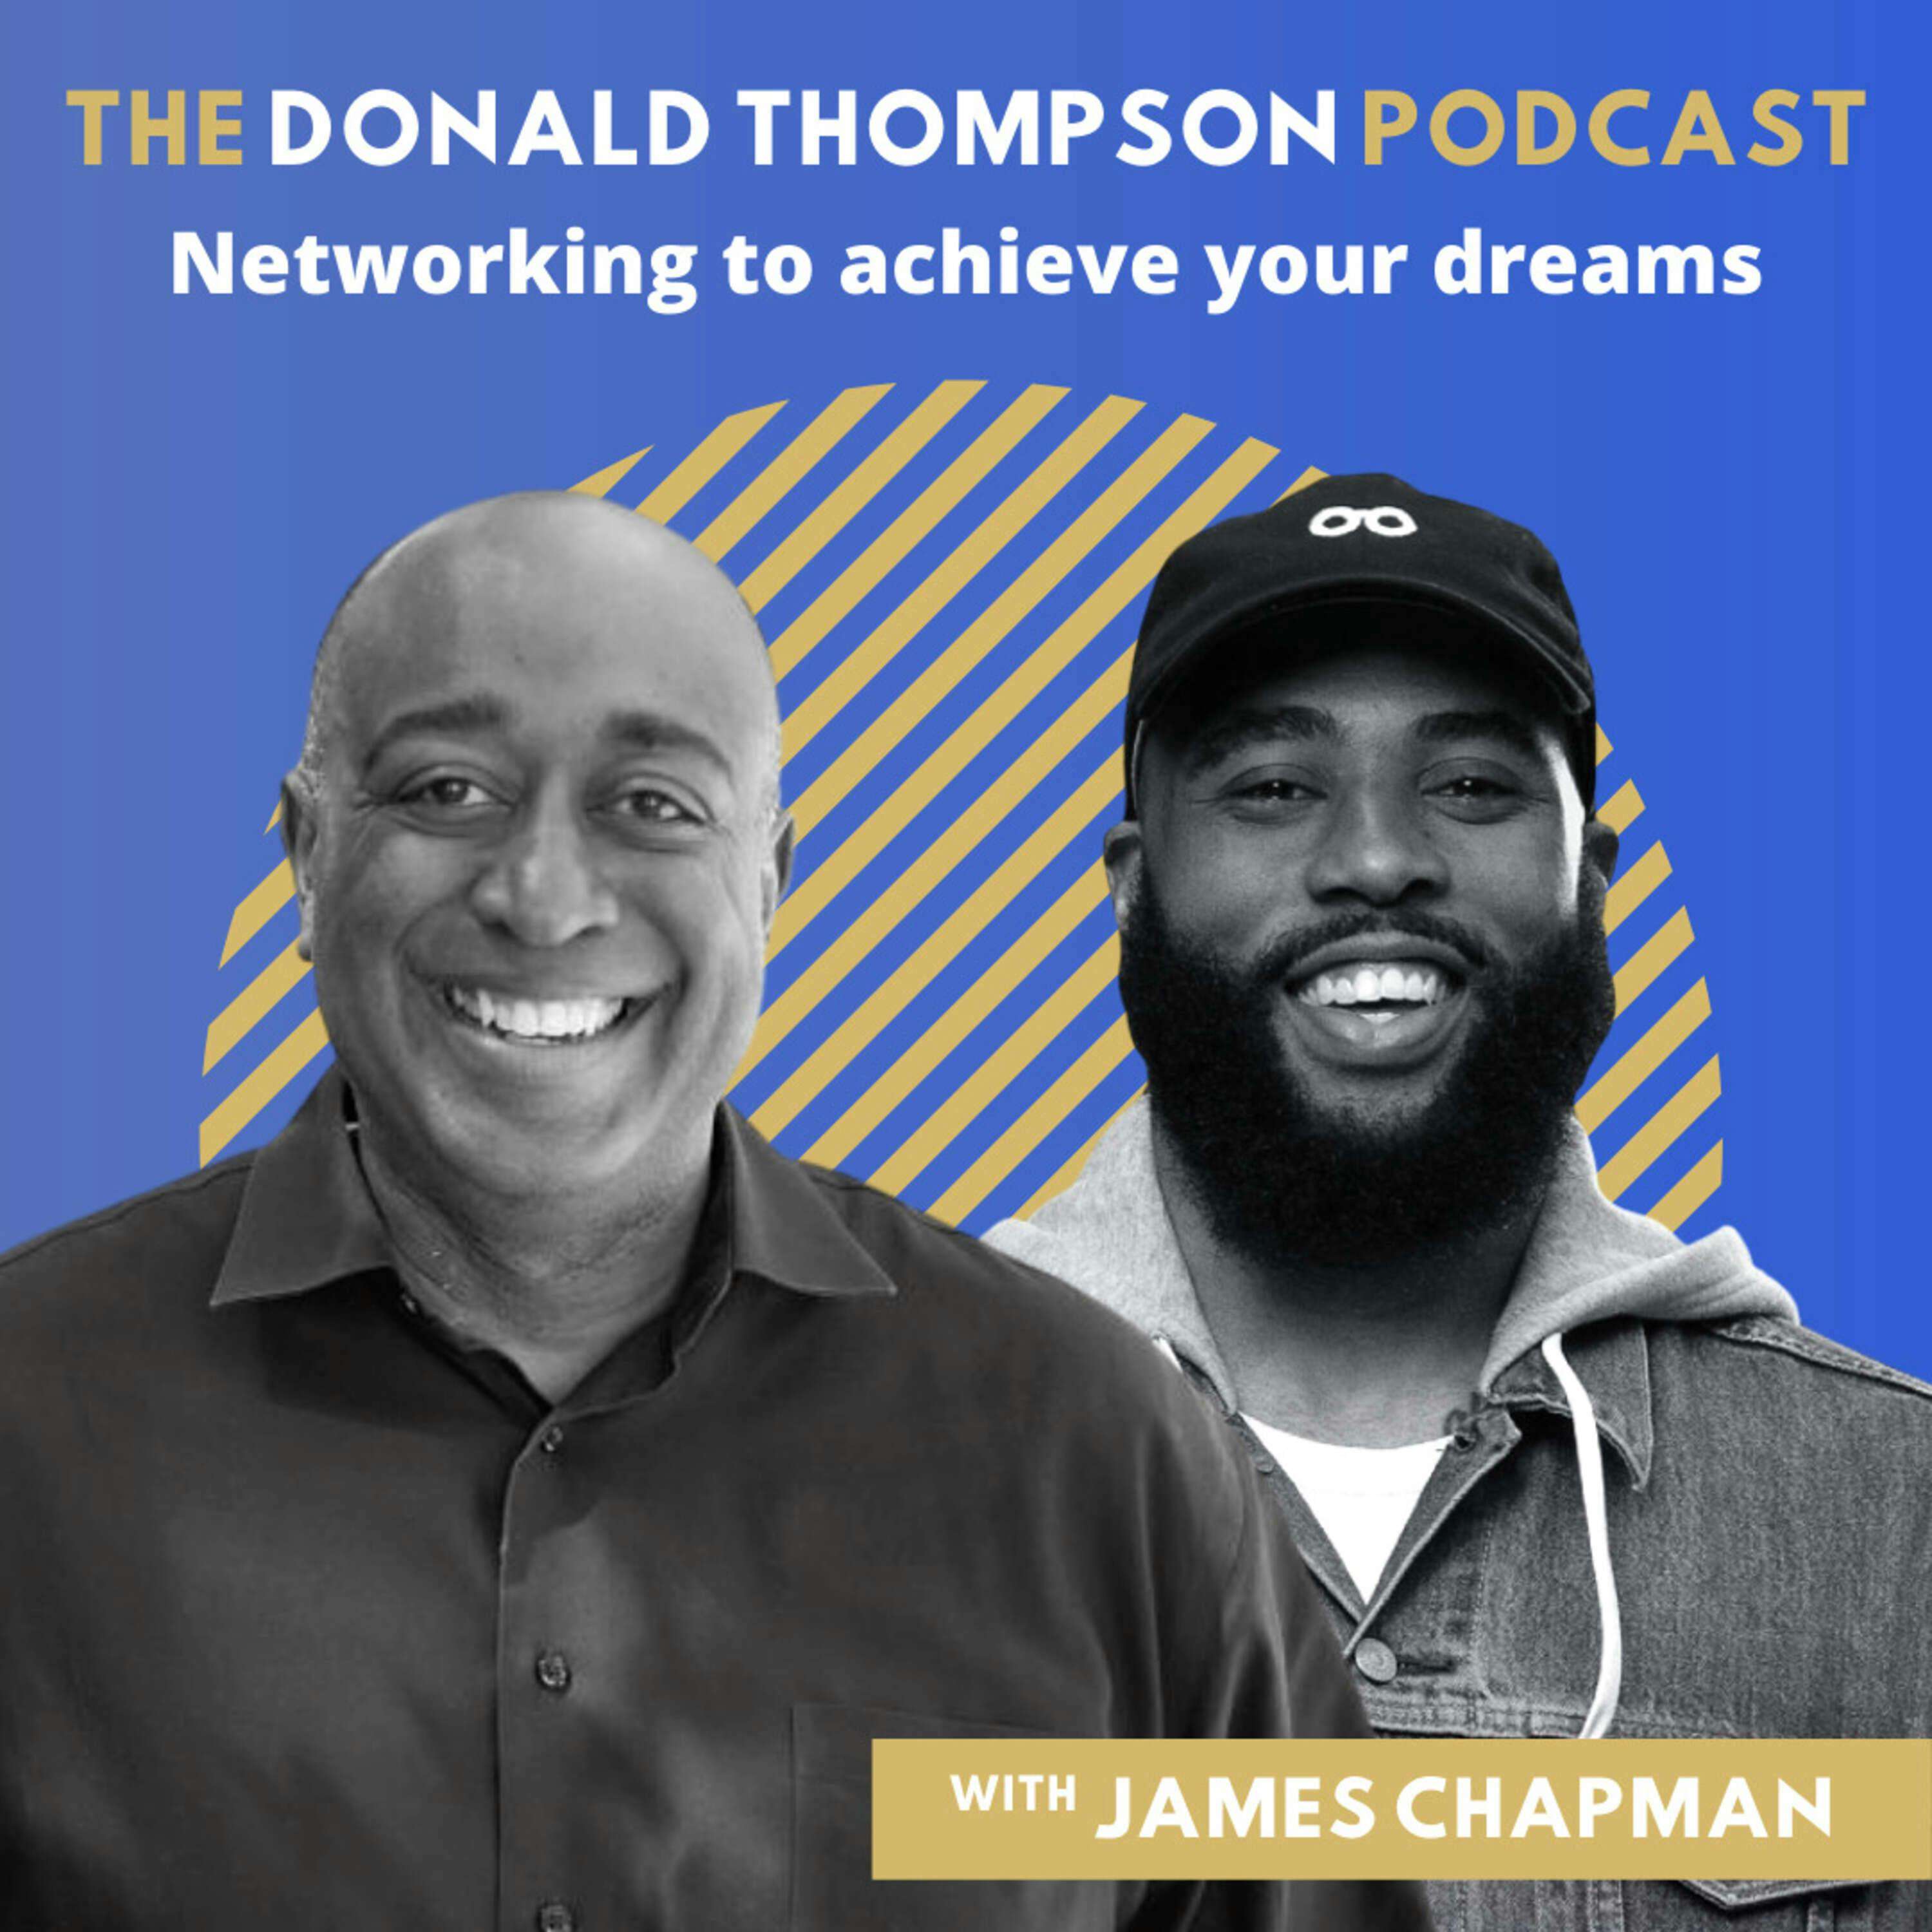 Networking to achieve your dreams, with Plain Sight founder James Chapman